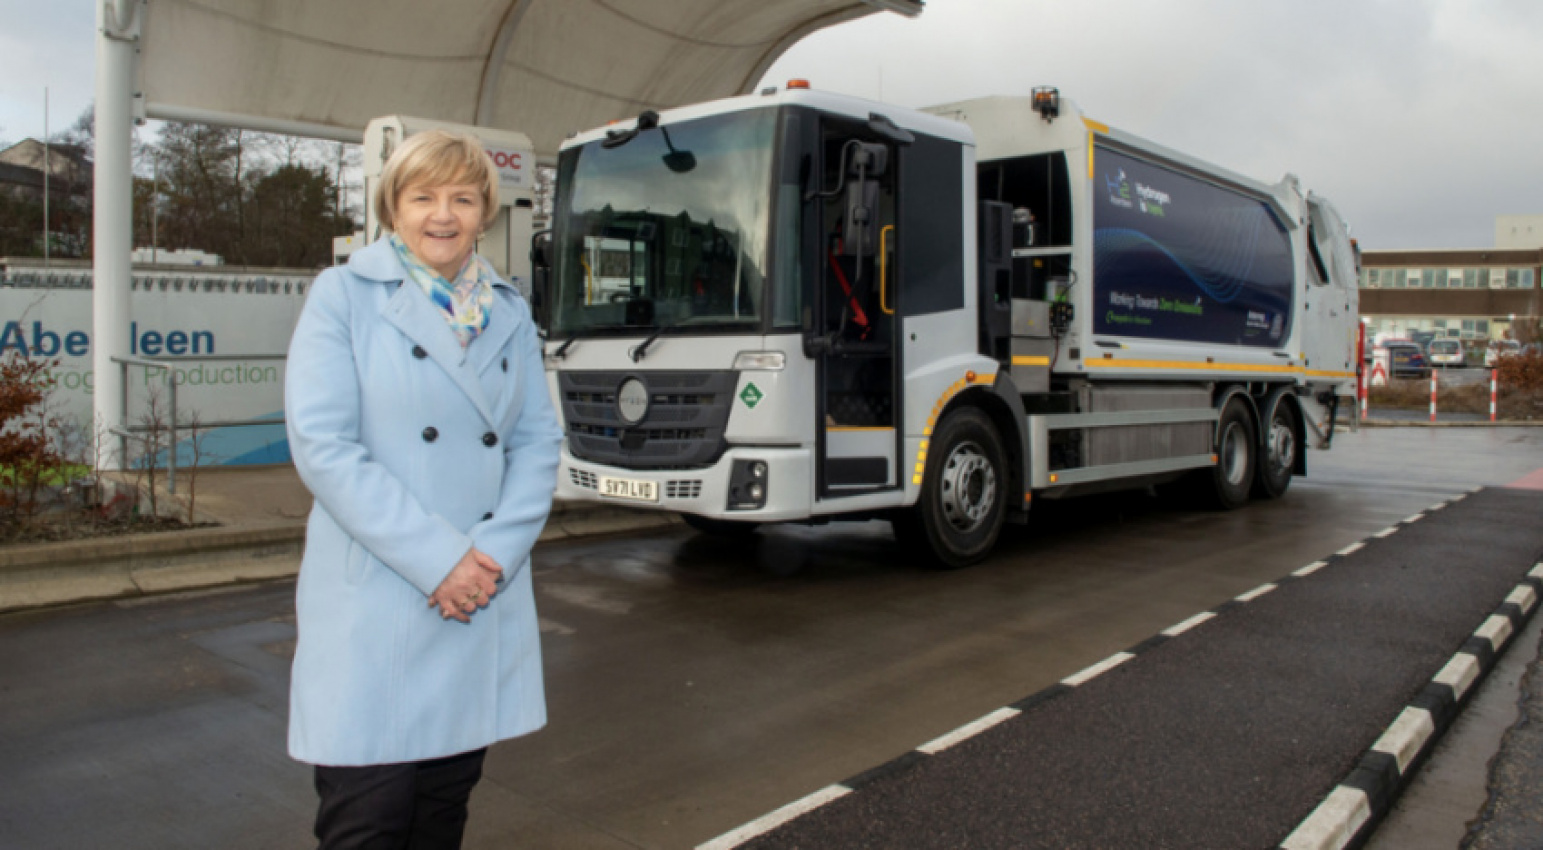 autos, cars, electric vehicles, breakdowns, commercial, ev infrastructure, hydrogen, aberdeen city council adds hydrogen fuel cell waste truck to fleet